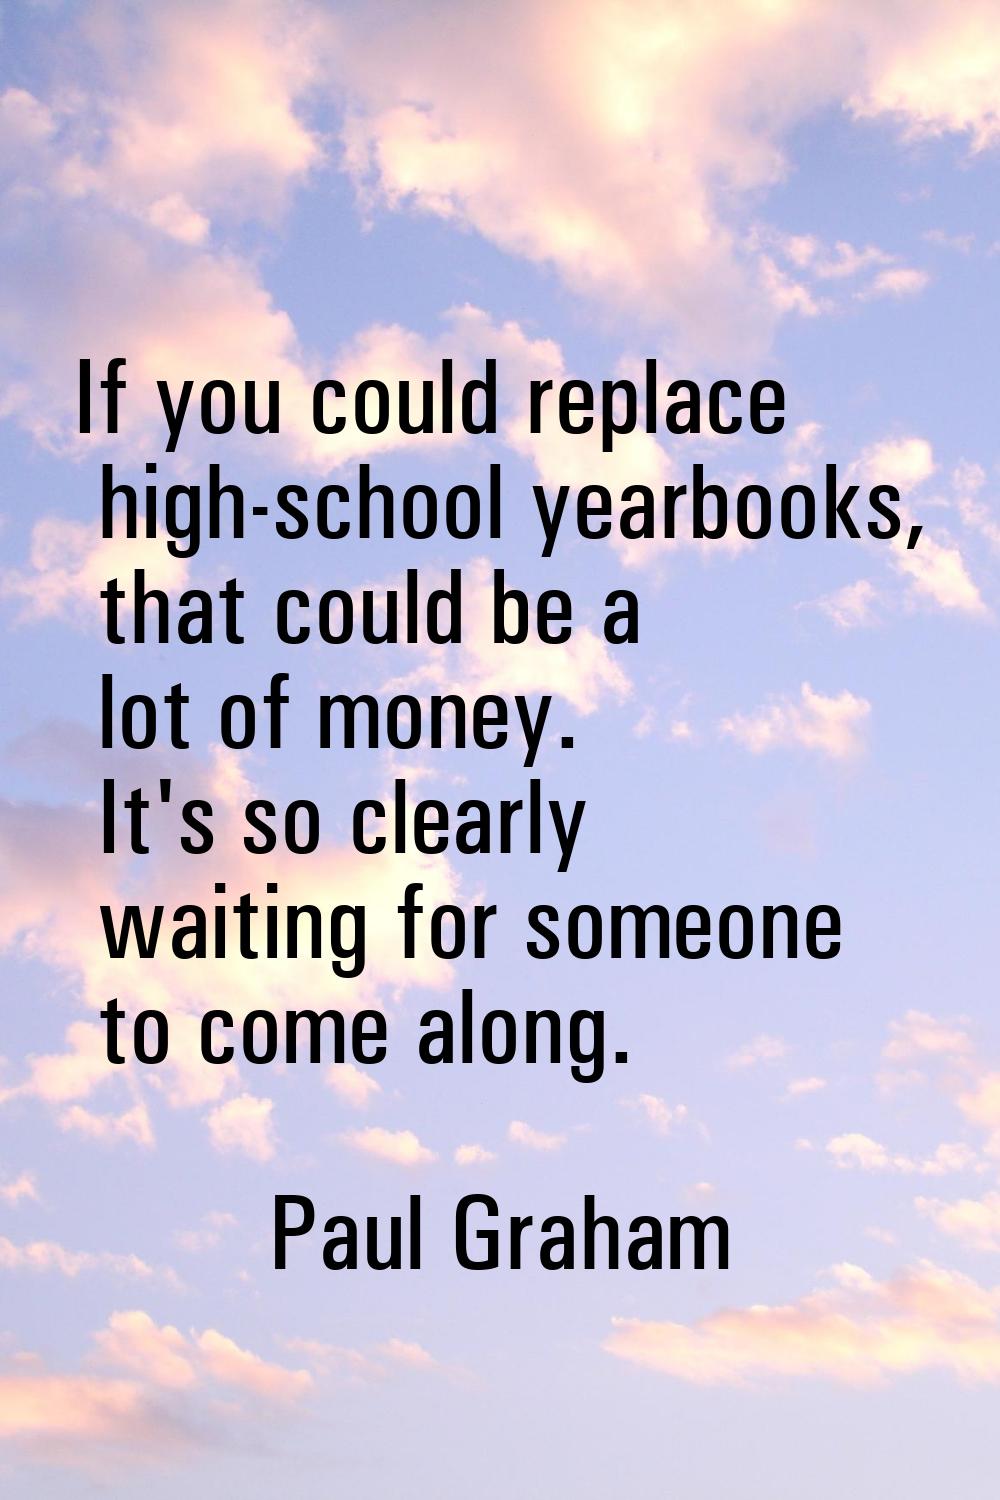 If you could replace high-school yearbooks, that could be a lot of money. It's so clearly waiting f